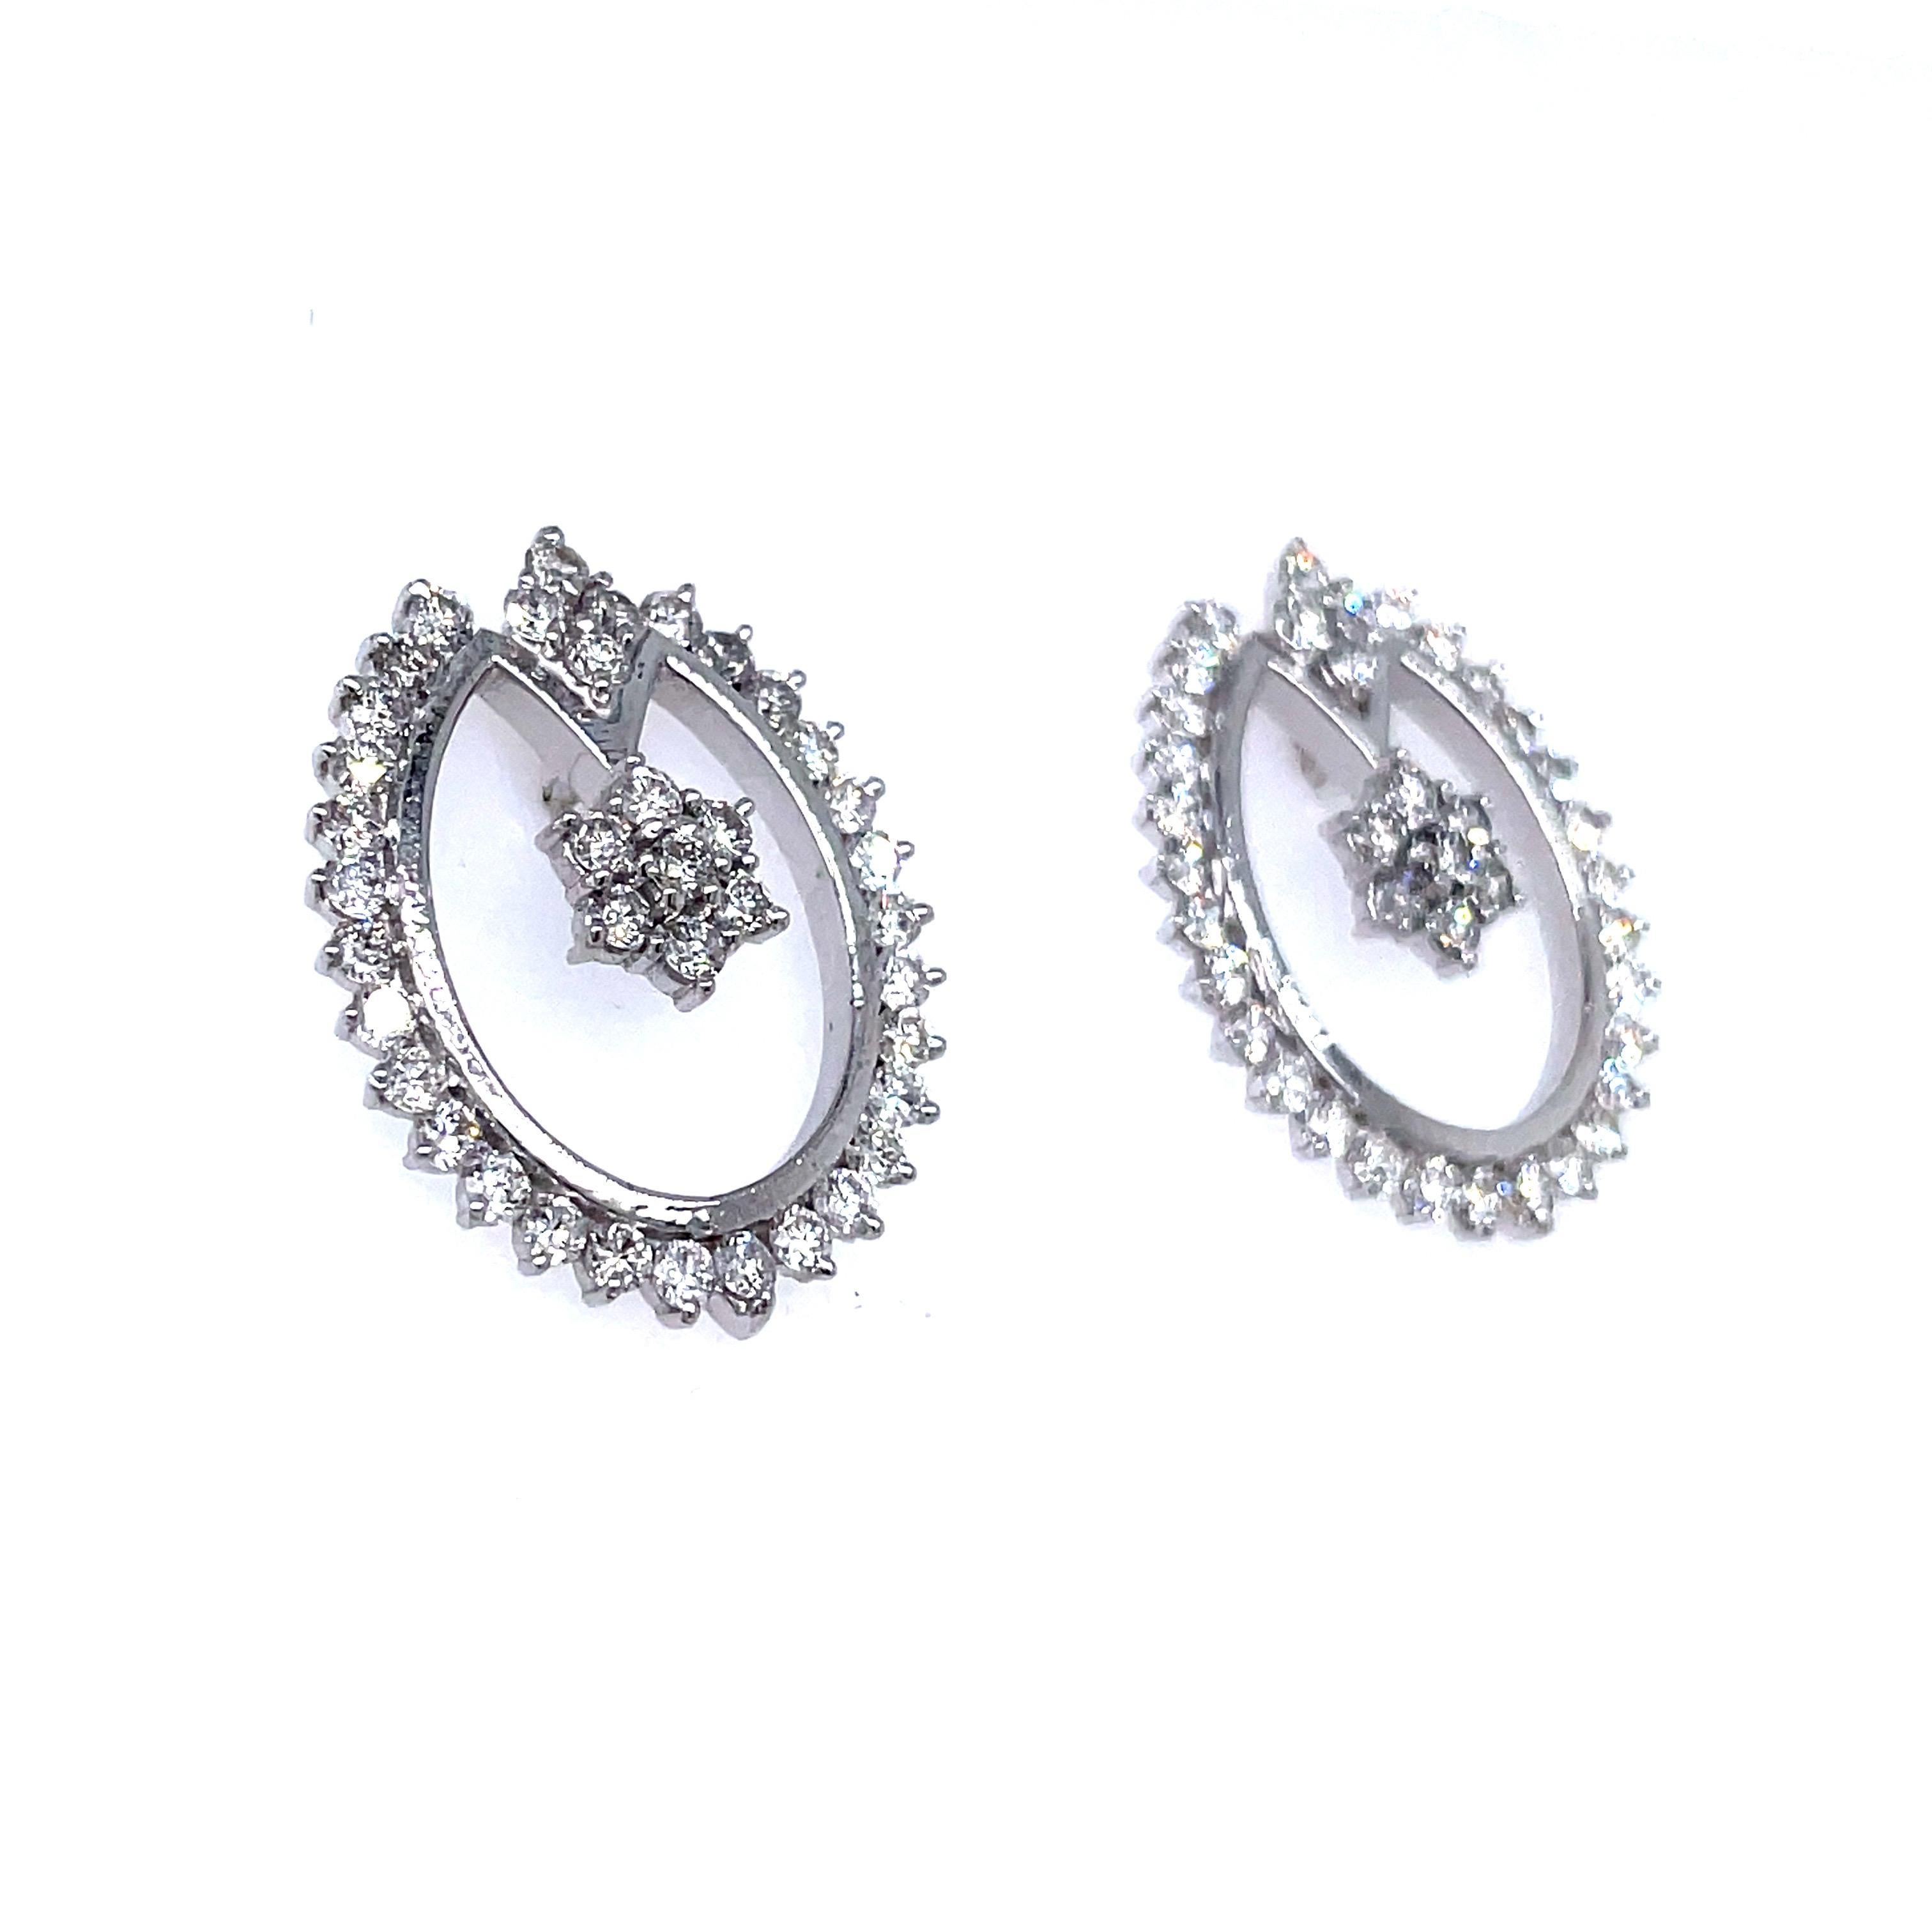 Brilliant Cut 14k White Gold Diamond Earrings With Tulip Pattern For Sale